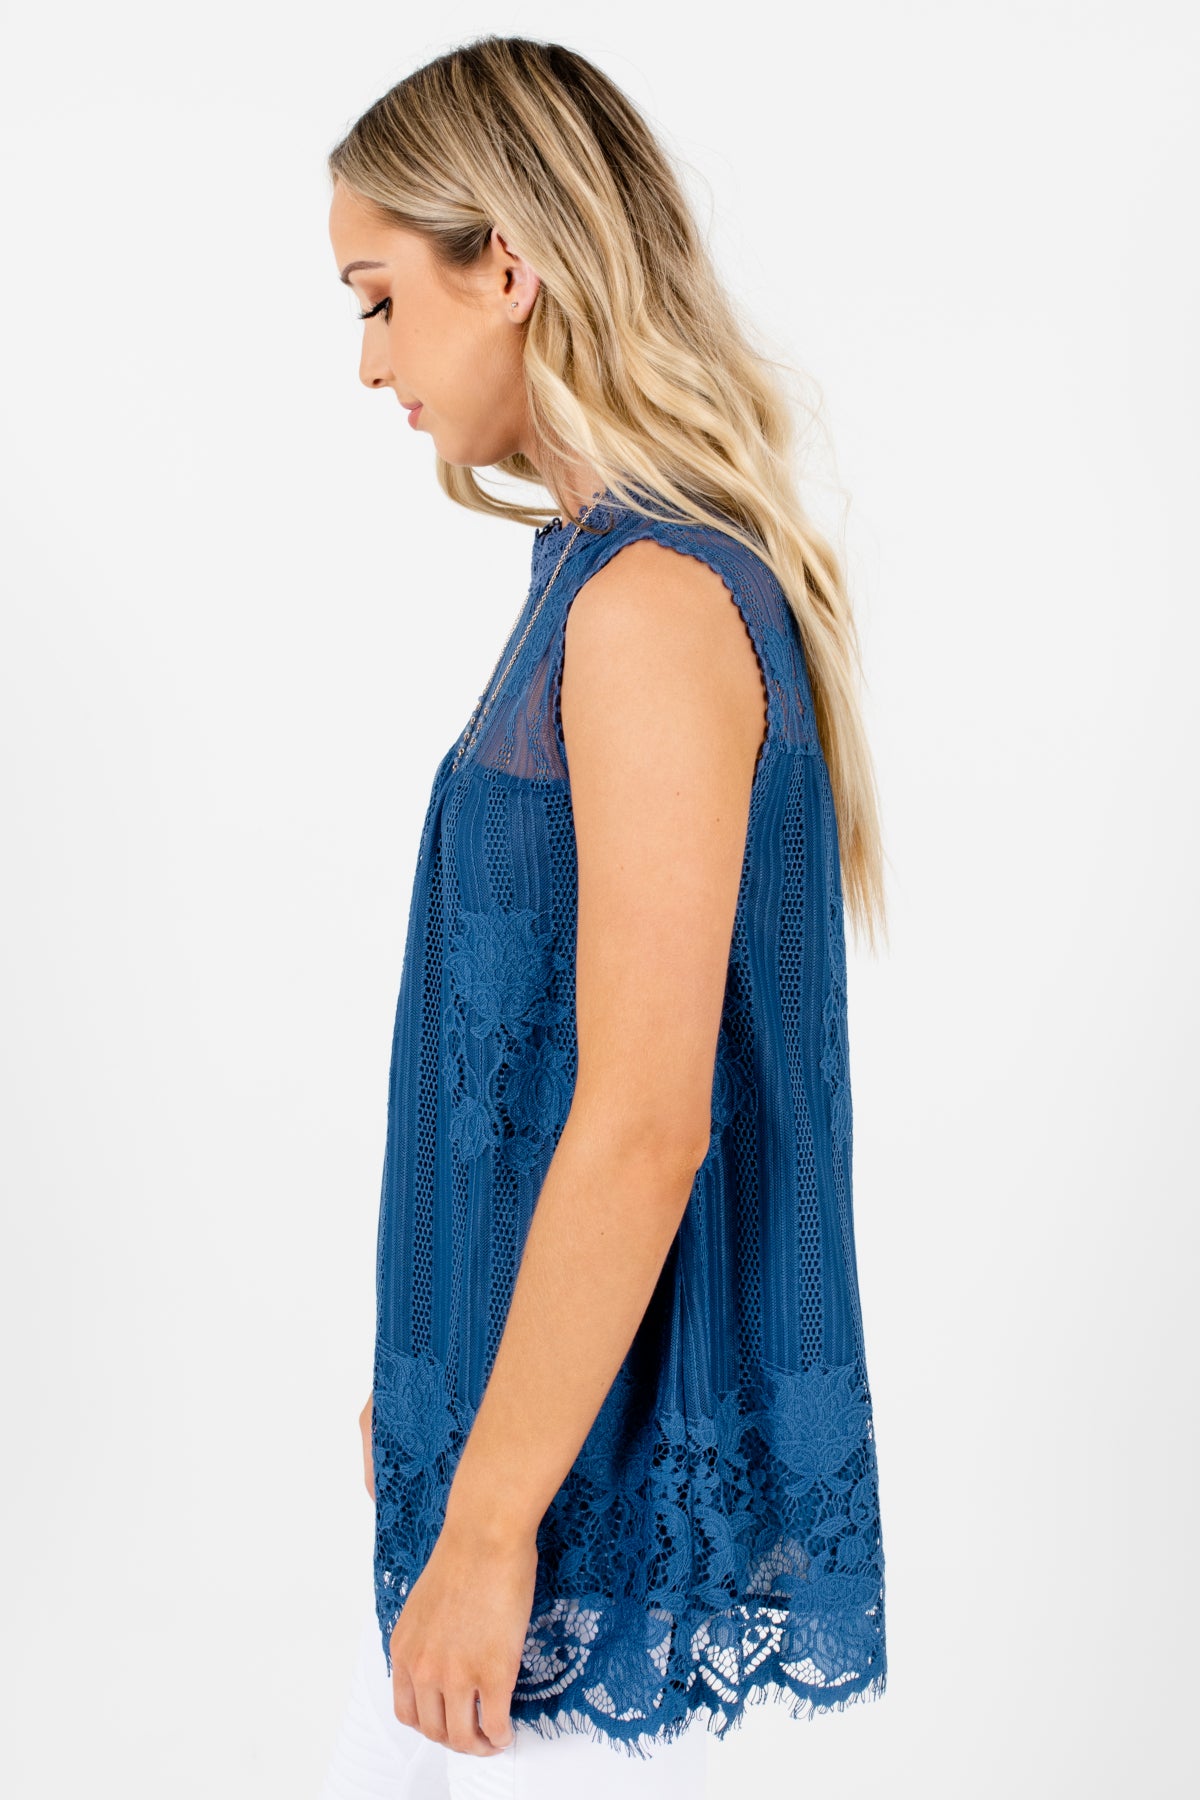 Women's Blue Semi-Sheer Material Boutique Lace Tops